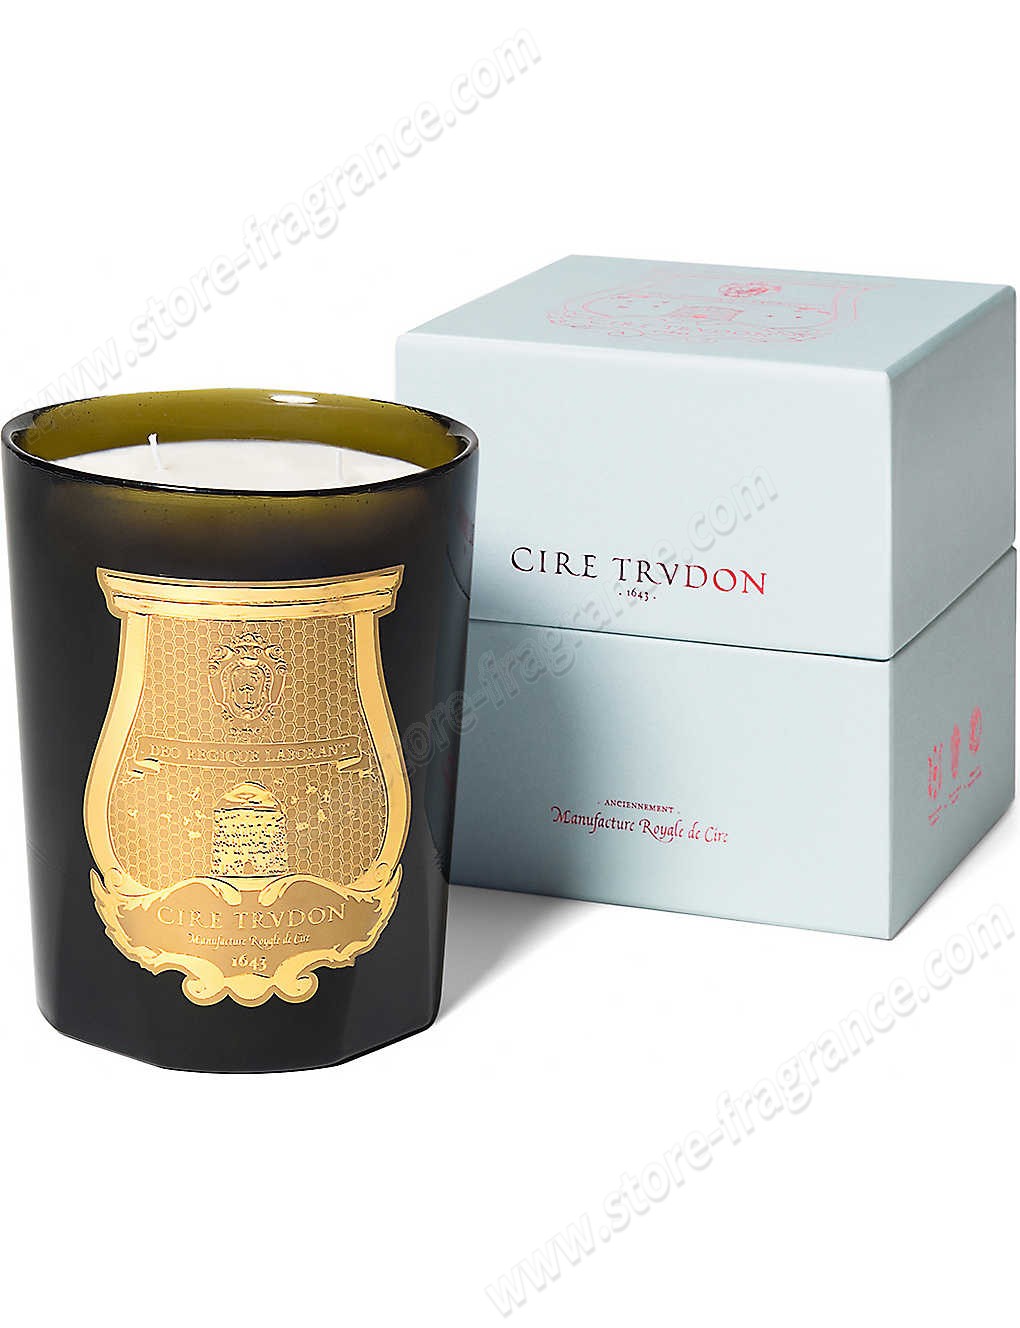 CIRE TRUDON/Abd El Kader scented candle 800g ✿ Discount Store - -0